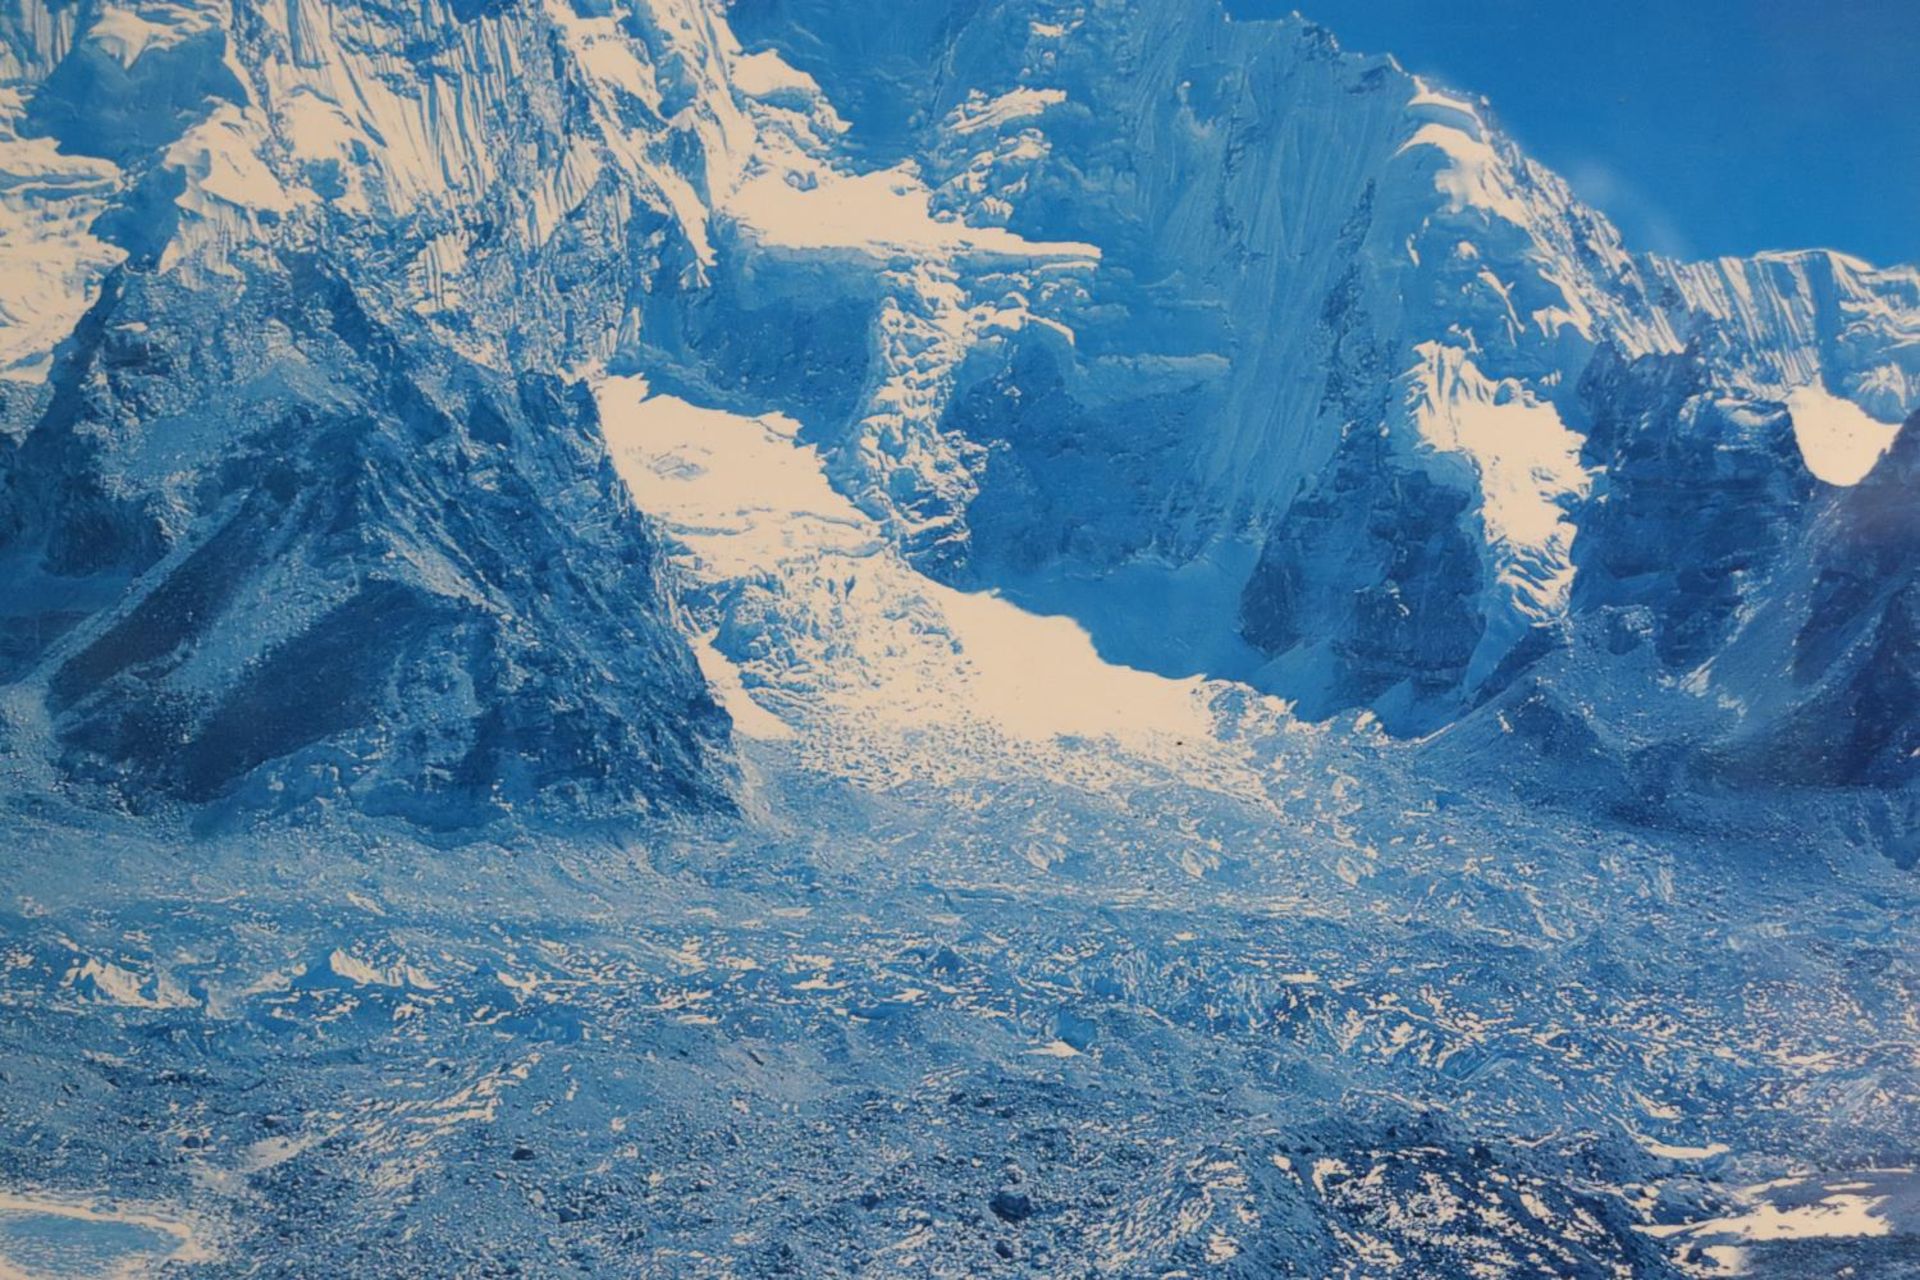 A PRINT OF EVEREST, 'TOP OF THE WORLD' - Image 2 of 5